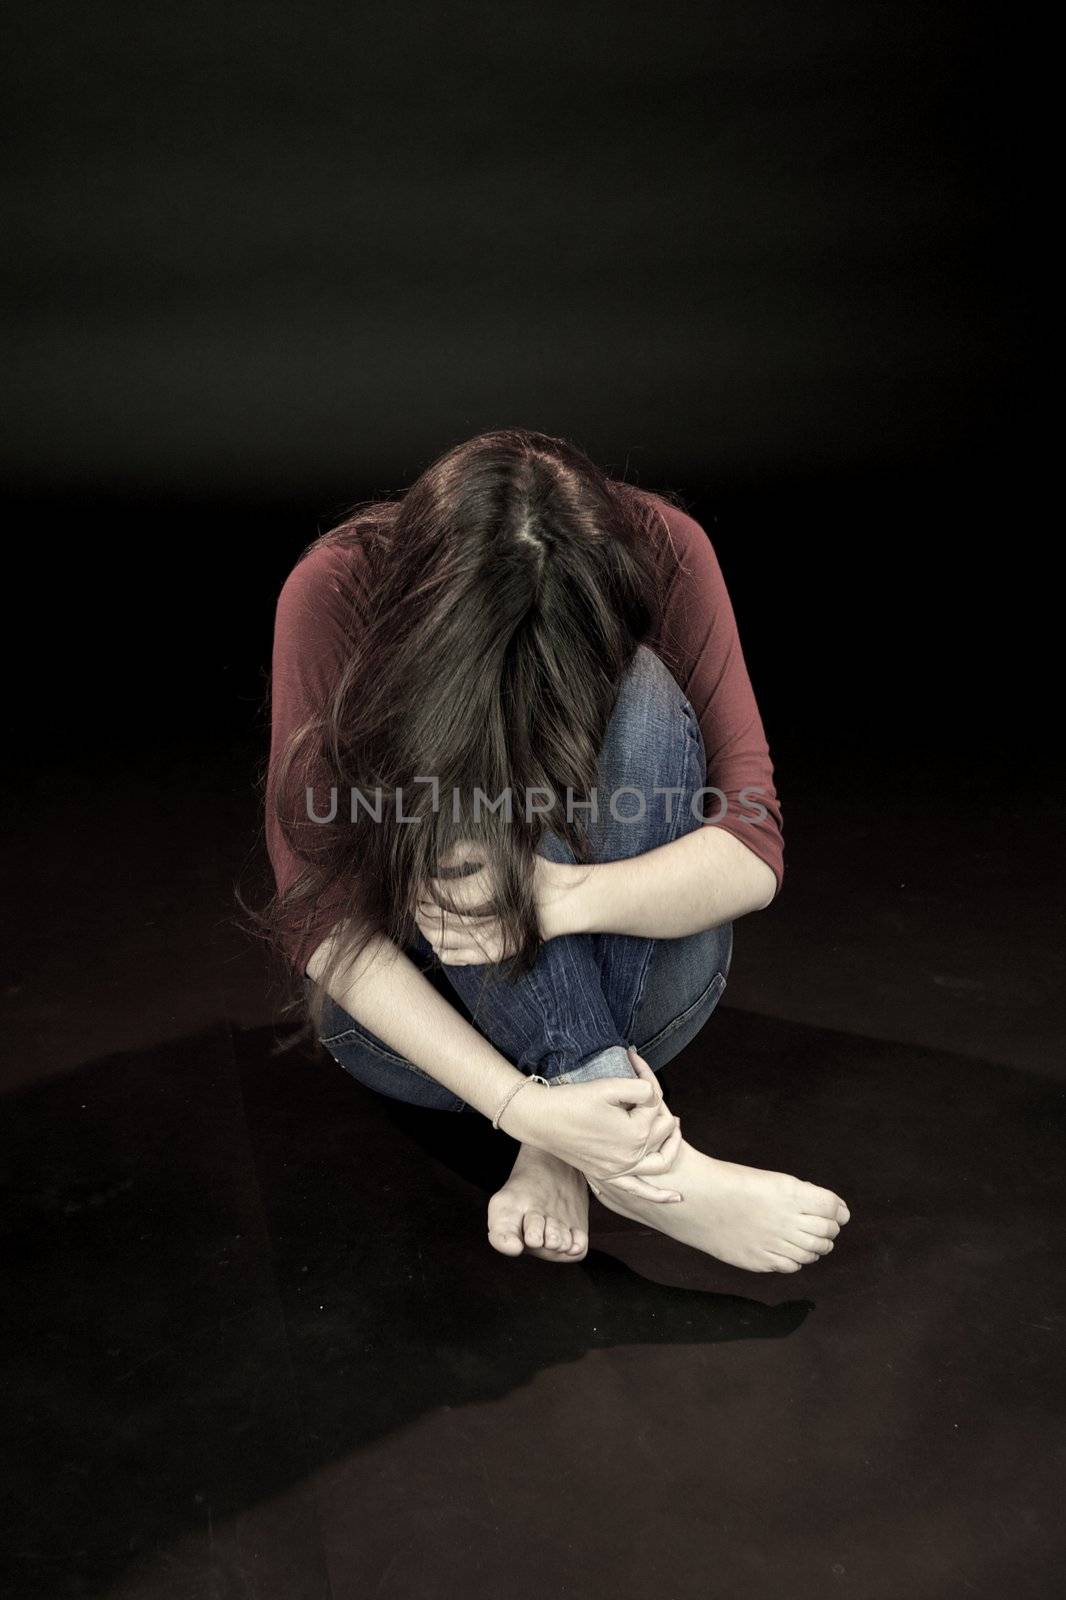 Young woman hiding scared about domestic violence by fmarsicano